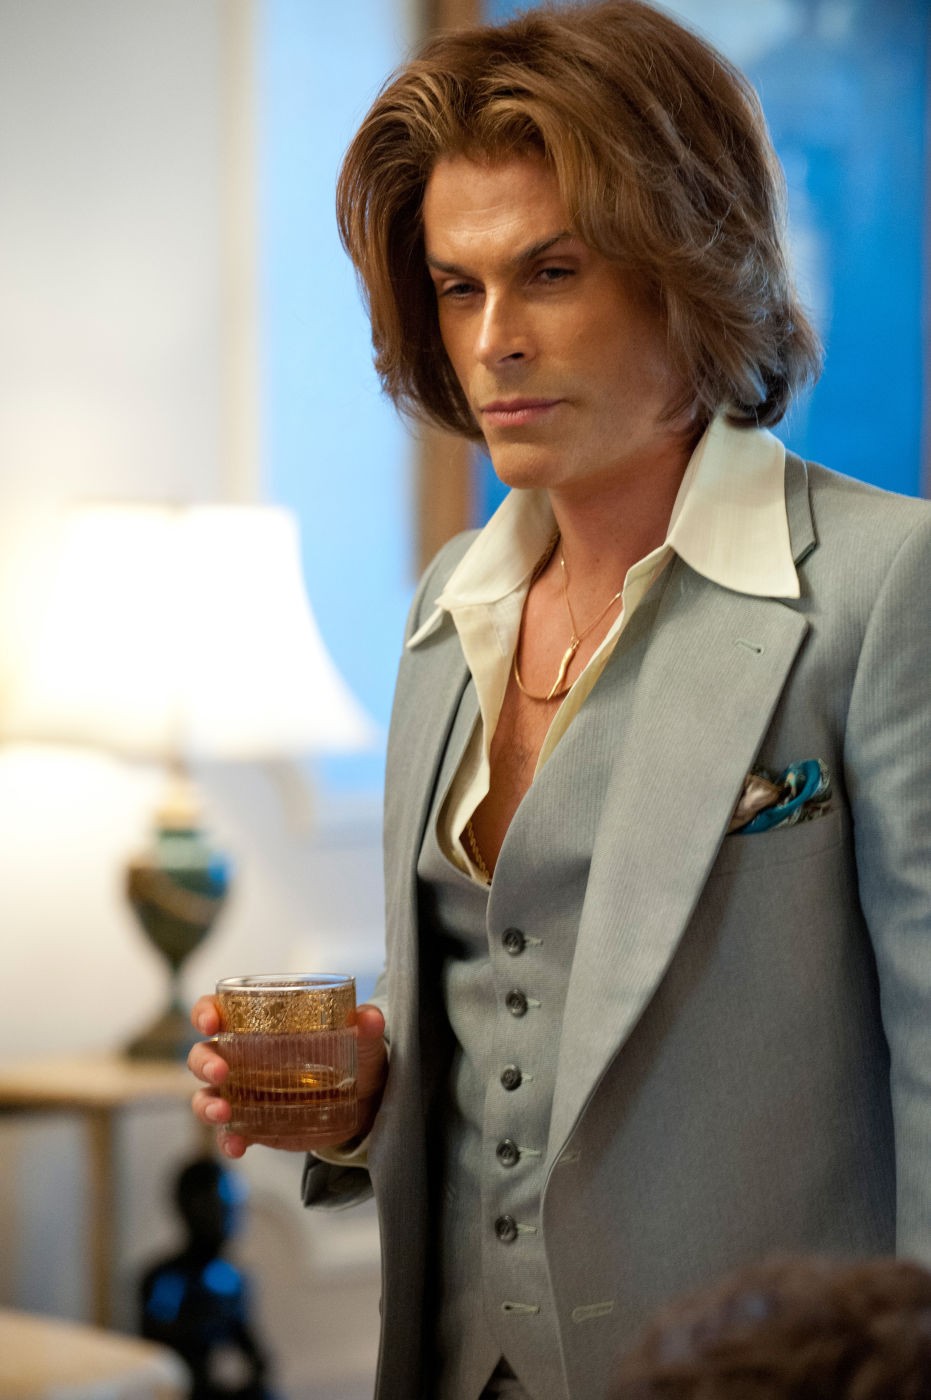 Rob Lowe stars as Dr. Jack Startz in HBO Films' Behind the Candelabra (2013)